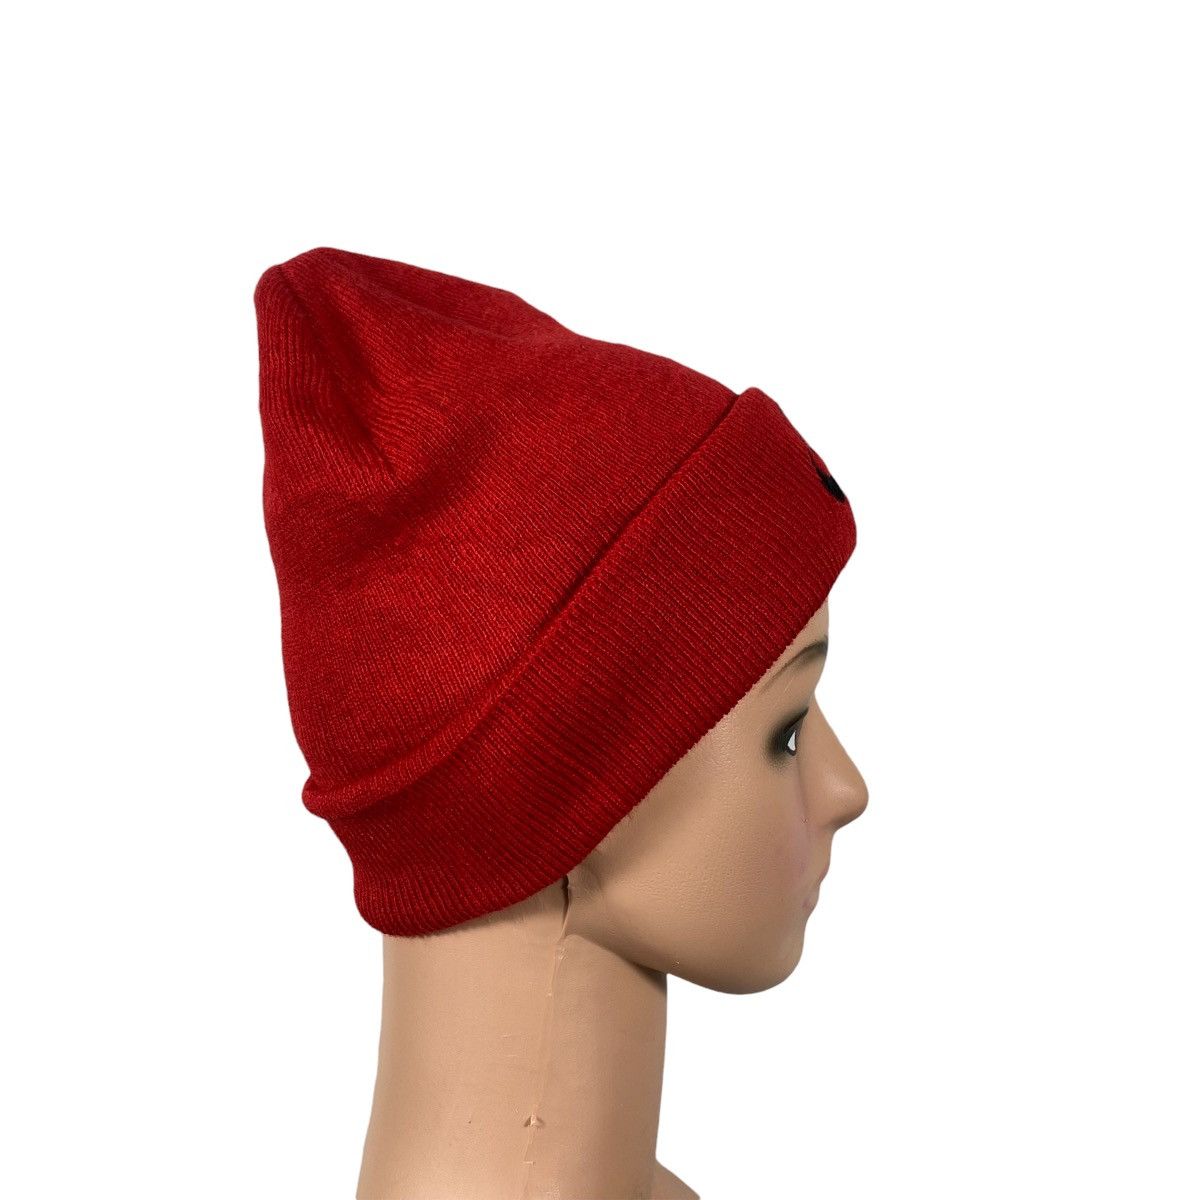 Vintage 90s Nike Embroidery Beanie Unisex Red Colour - 4